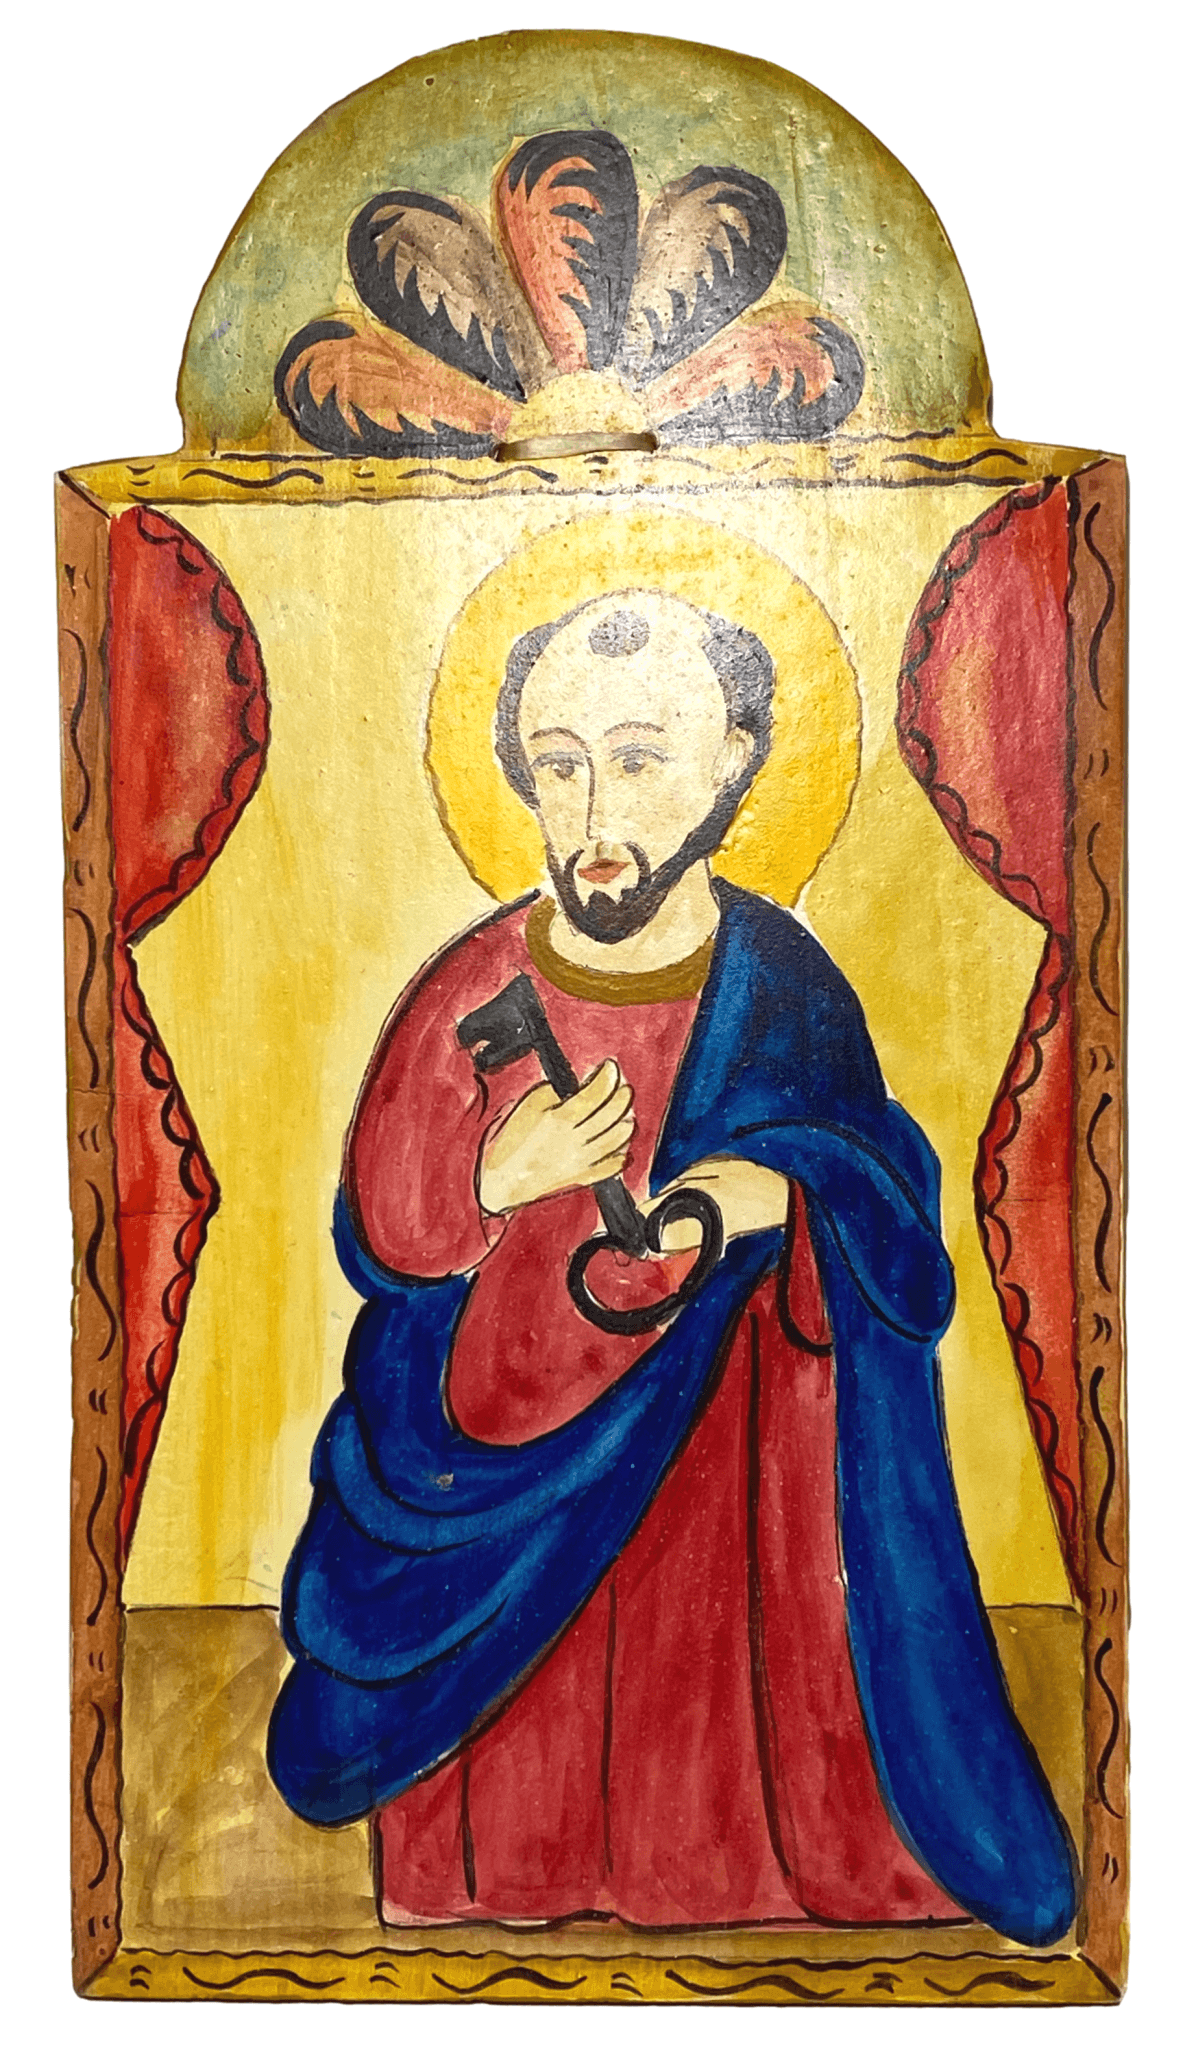 Retablo Saint Peter Carved Spanish Colonial Art Wood Handpainted Natural Pigments by New Mexico Artist Juanito 5 3/8 L x 1/2 W x 10 H inches - Ysleta Mission Gift Shop- VOTED El Paso's Best Gift Shop